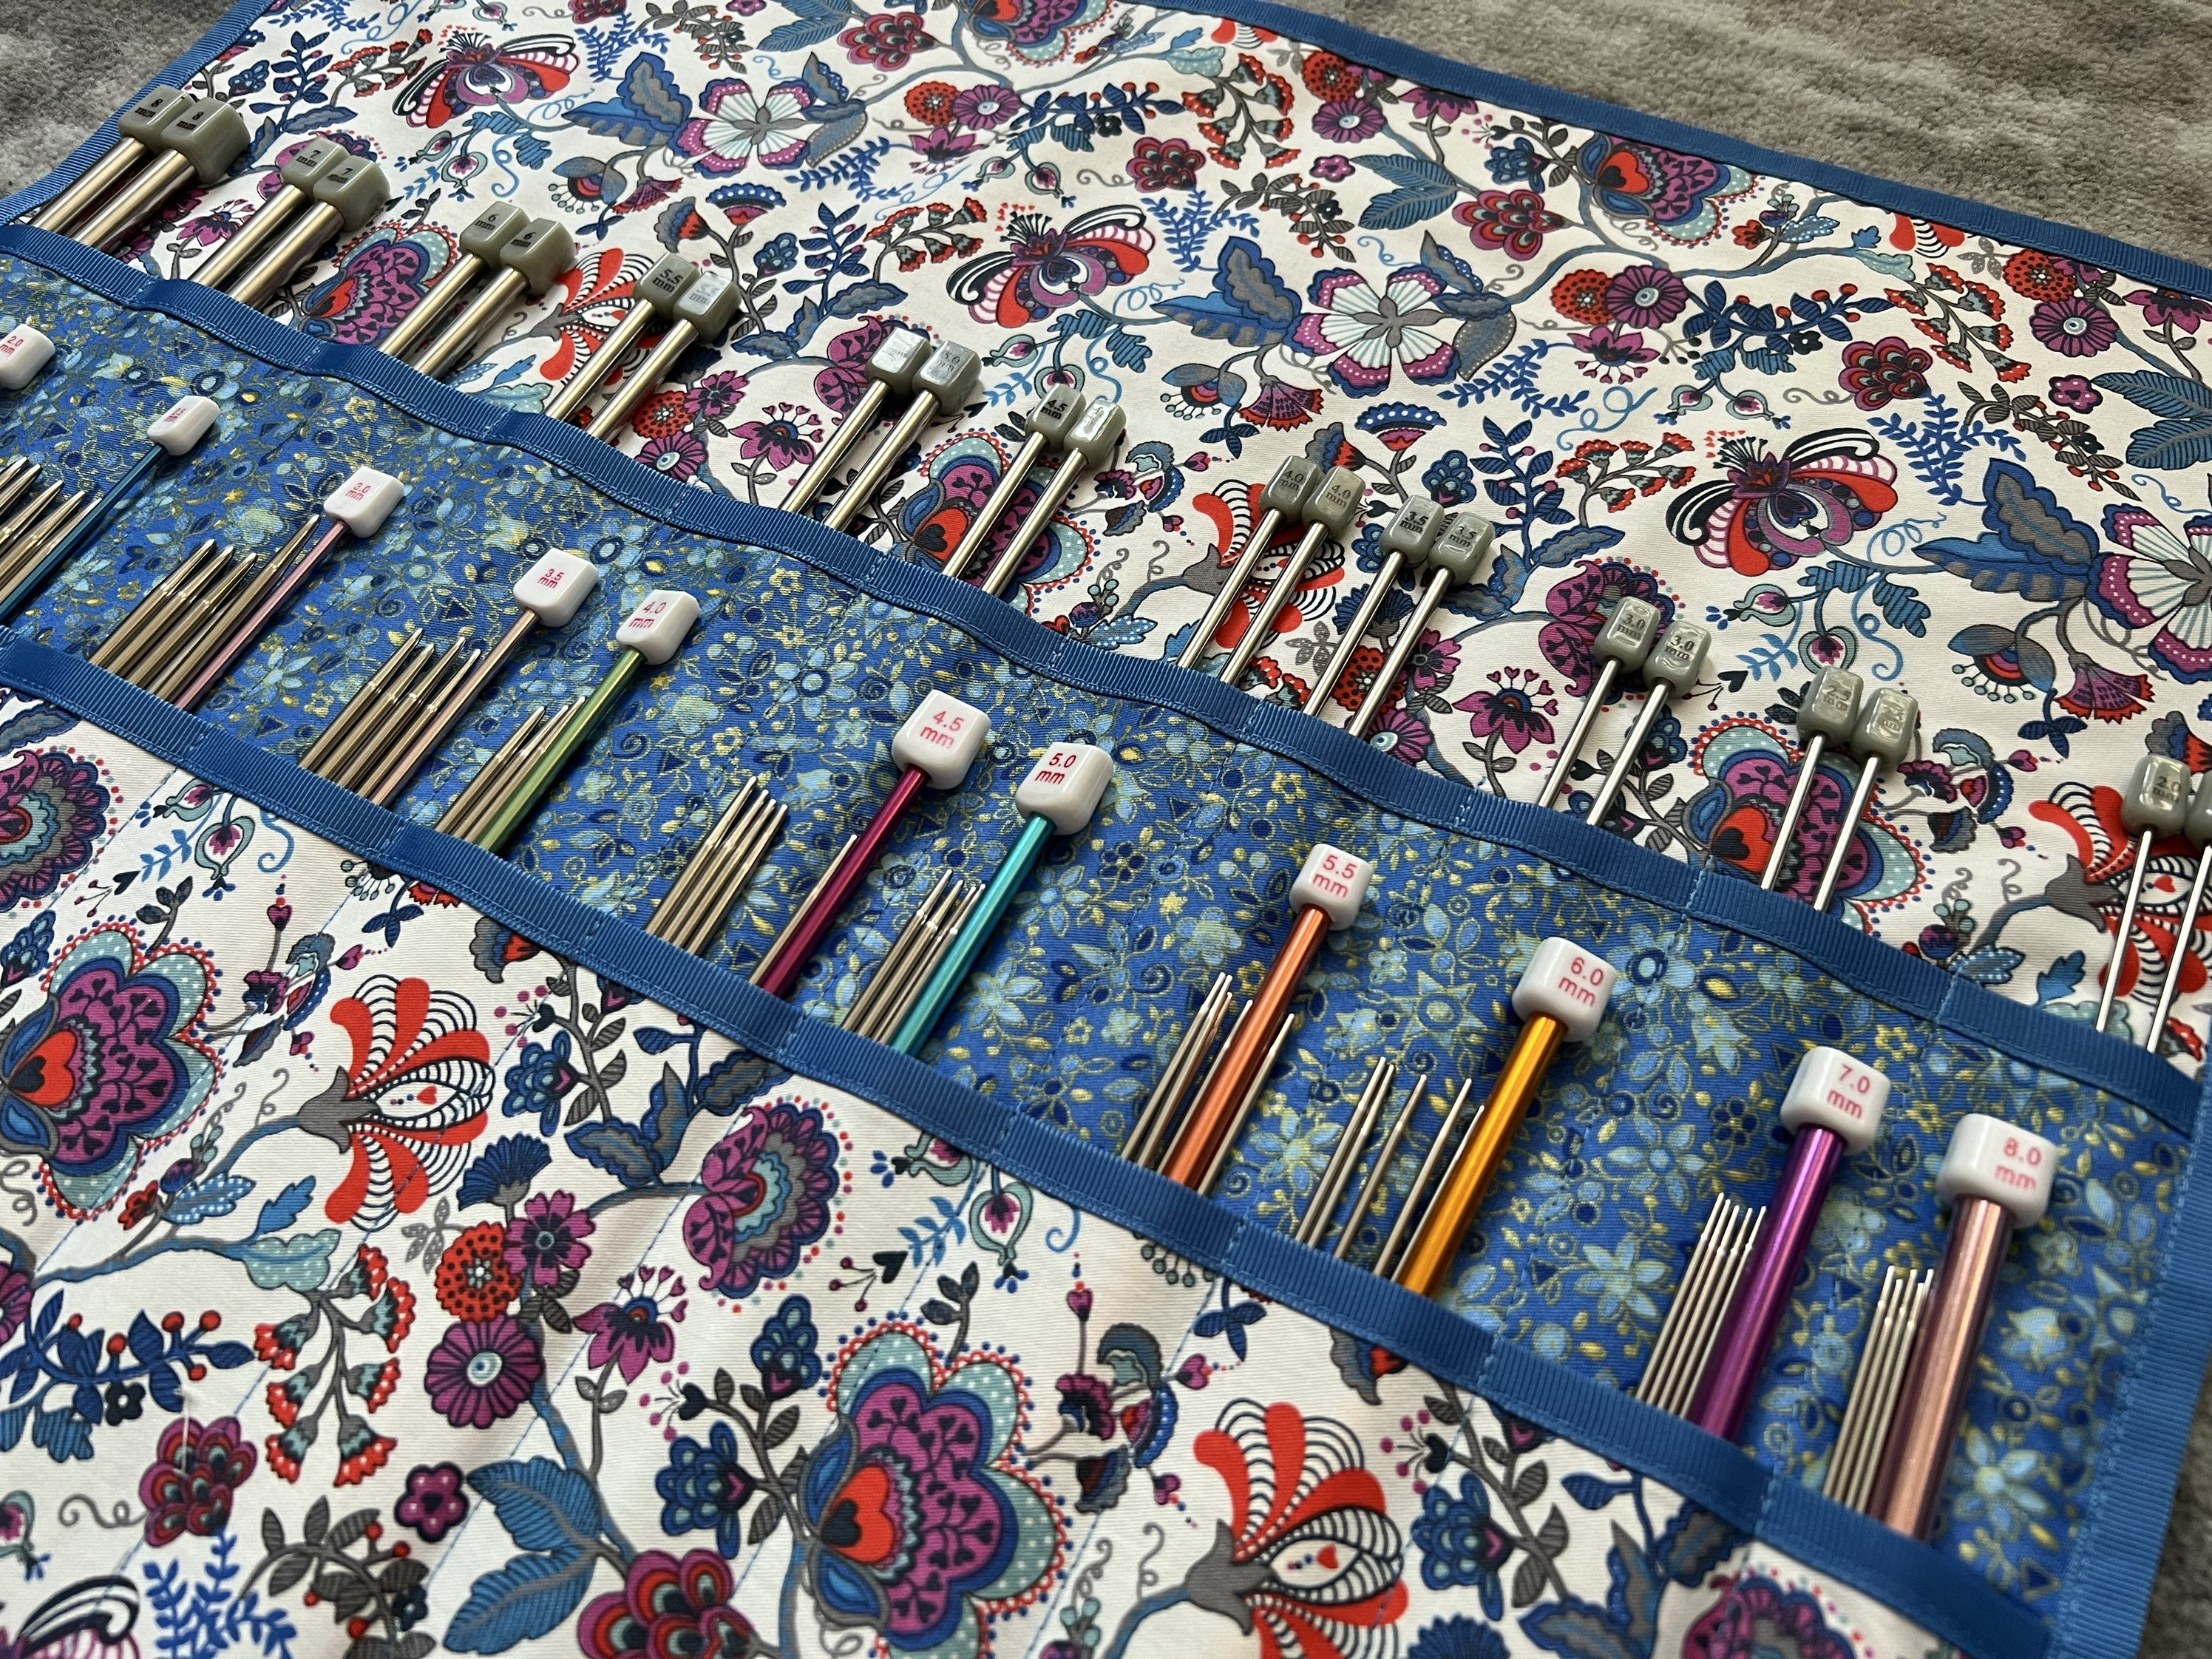 Quilted Blue Floral Knitting Needle Storage Wrap – Make & Mend